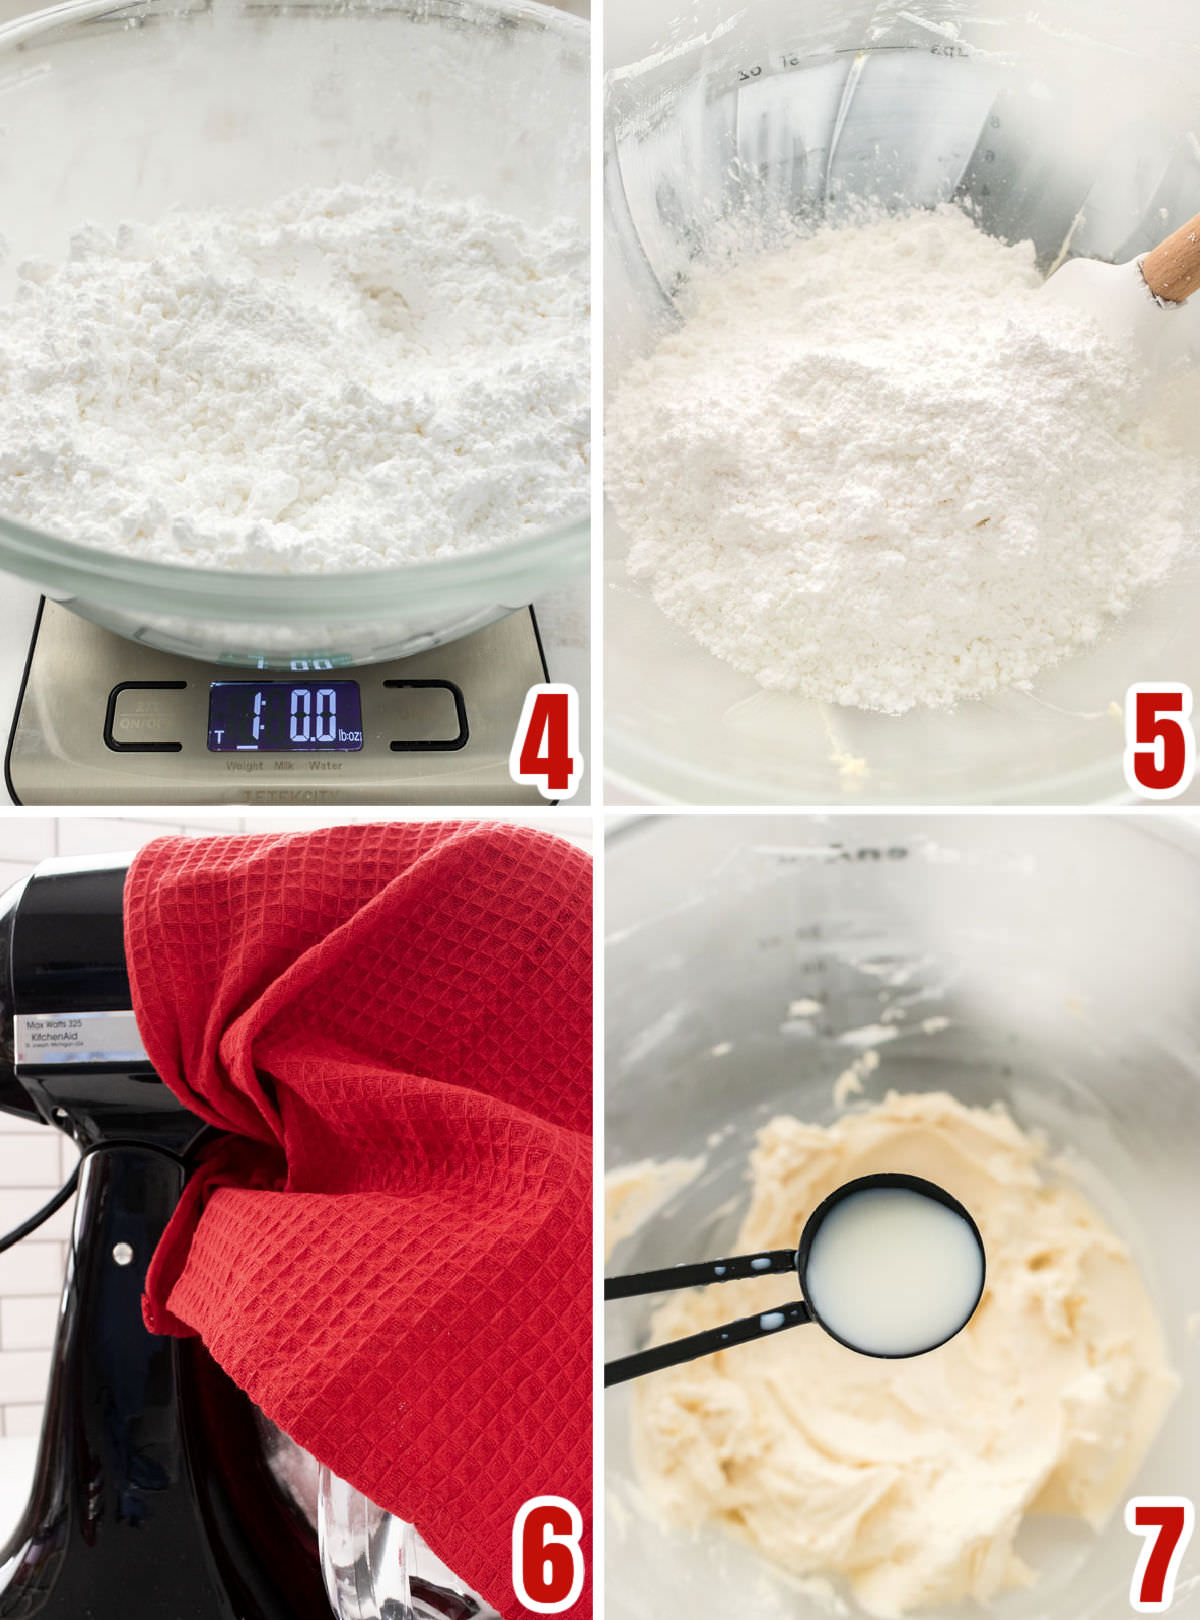 Collage image showing the steps for adding the Powdered Sugar to the frosting.